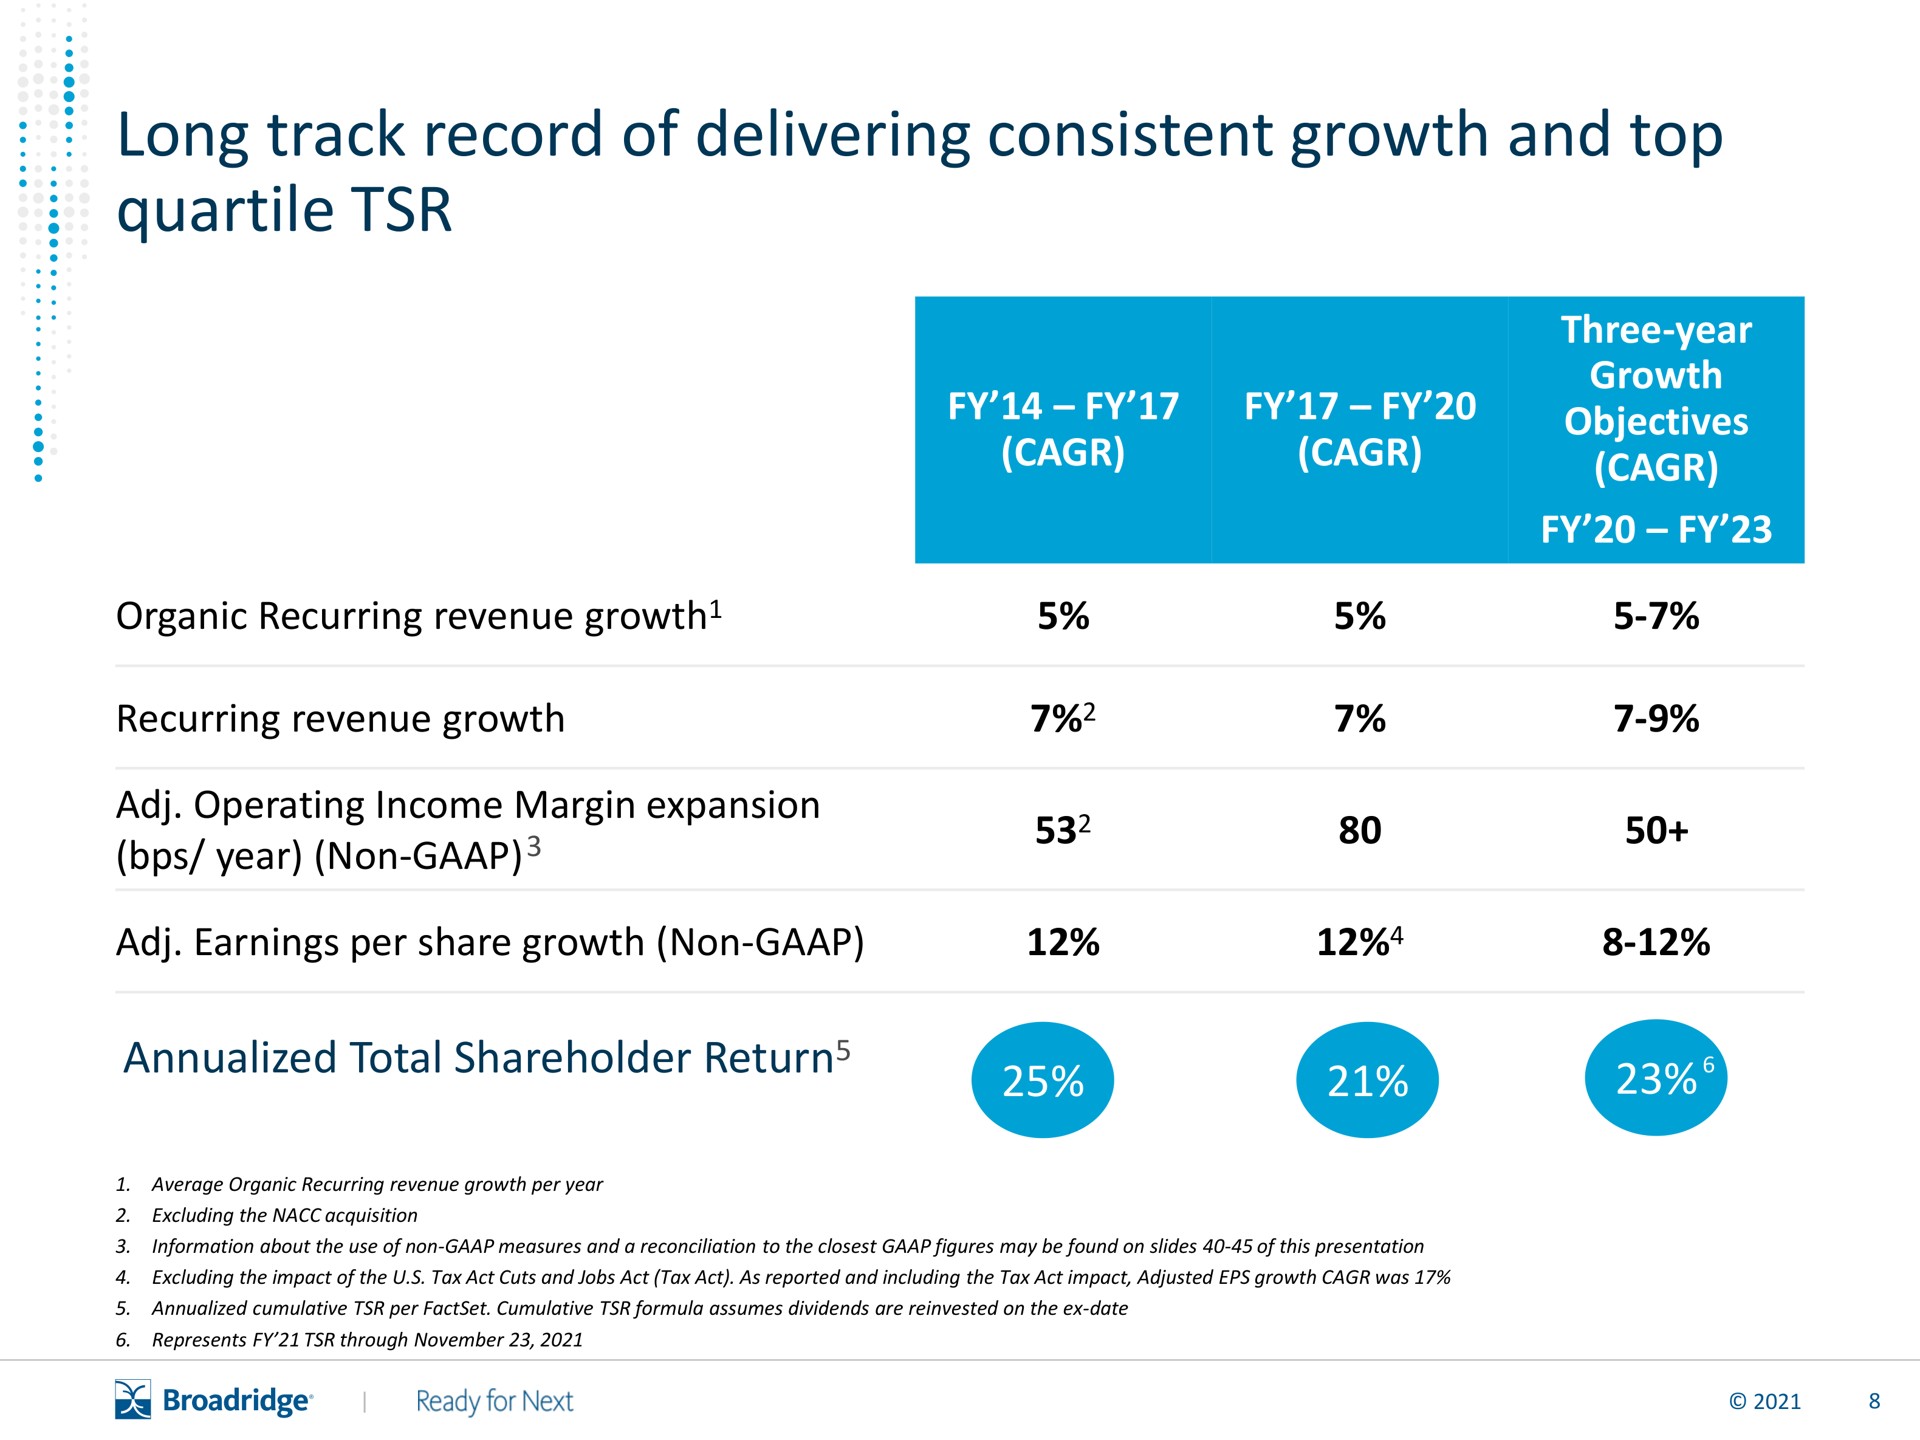 long track record of delivering consistent growth and top quartile | Broadridge Financial Solutions